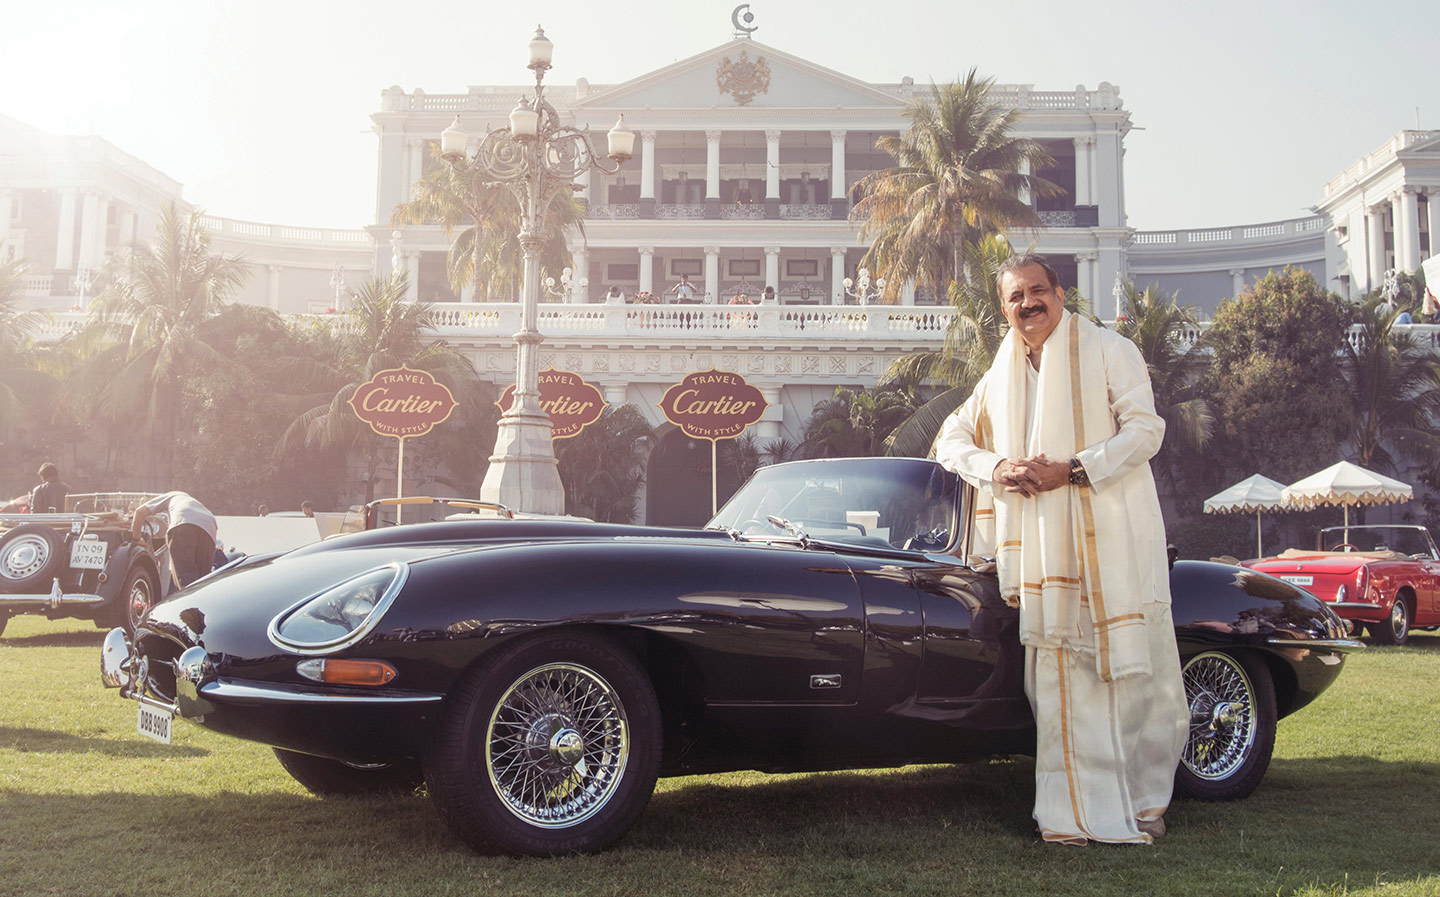 Road Raj: Meet Dr Ravi Prakash, the cardiac surgeon who owns one of the world’s finest classic car collections